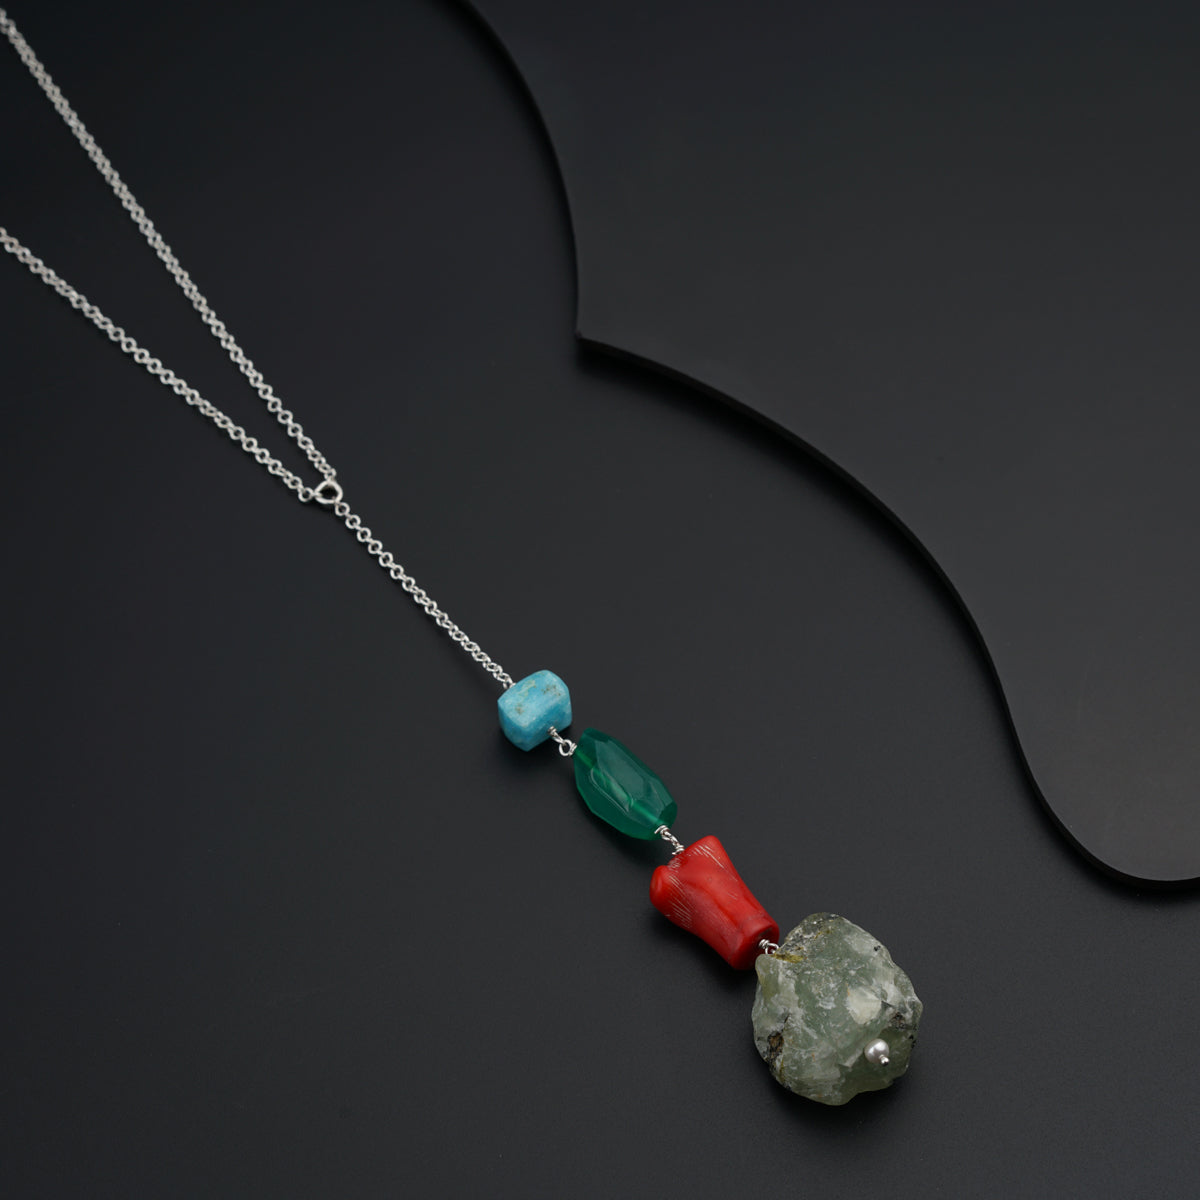 a necklace with a rock and a bead on it